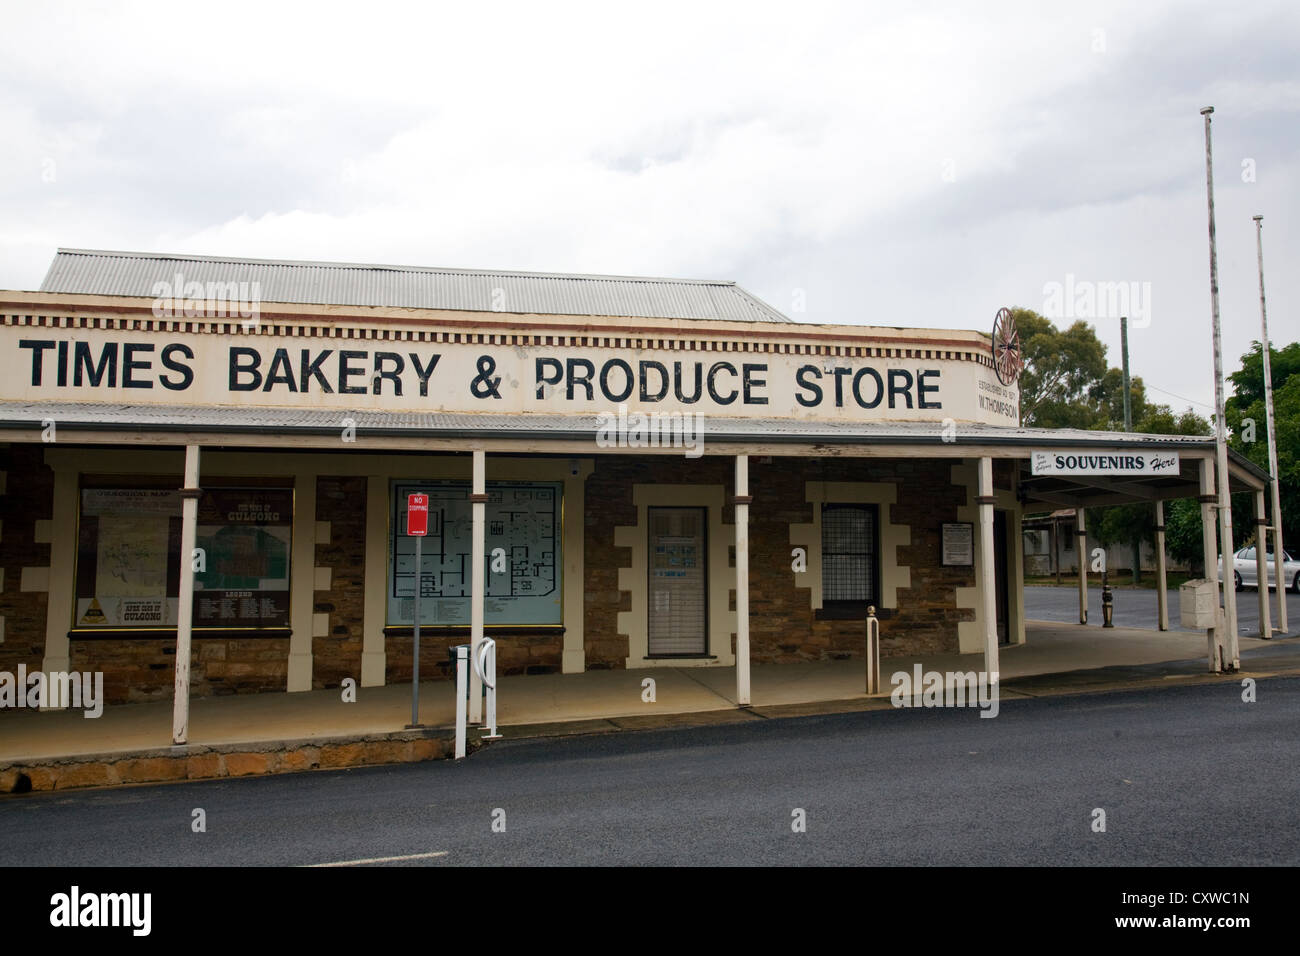 Gulgong historic Times bakery and produce store, a former gold mining town in regional new south wales,Australia Stock Photo